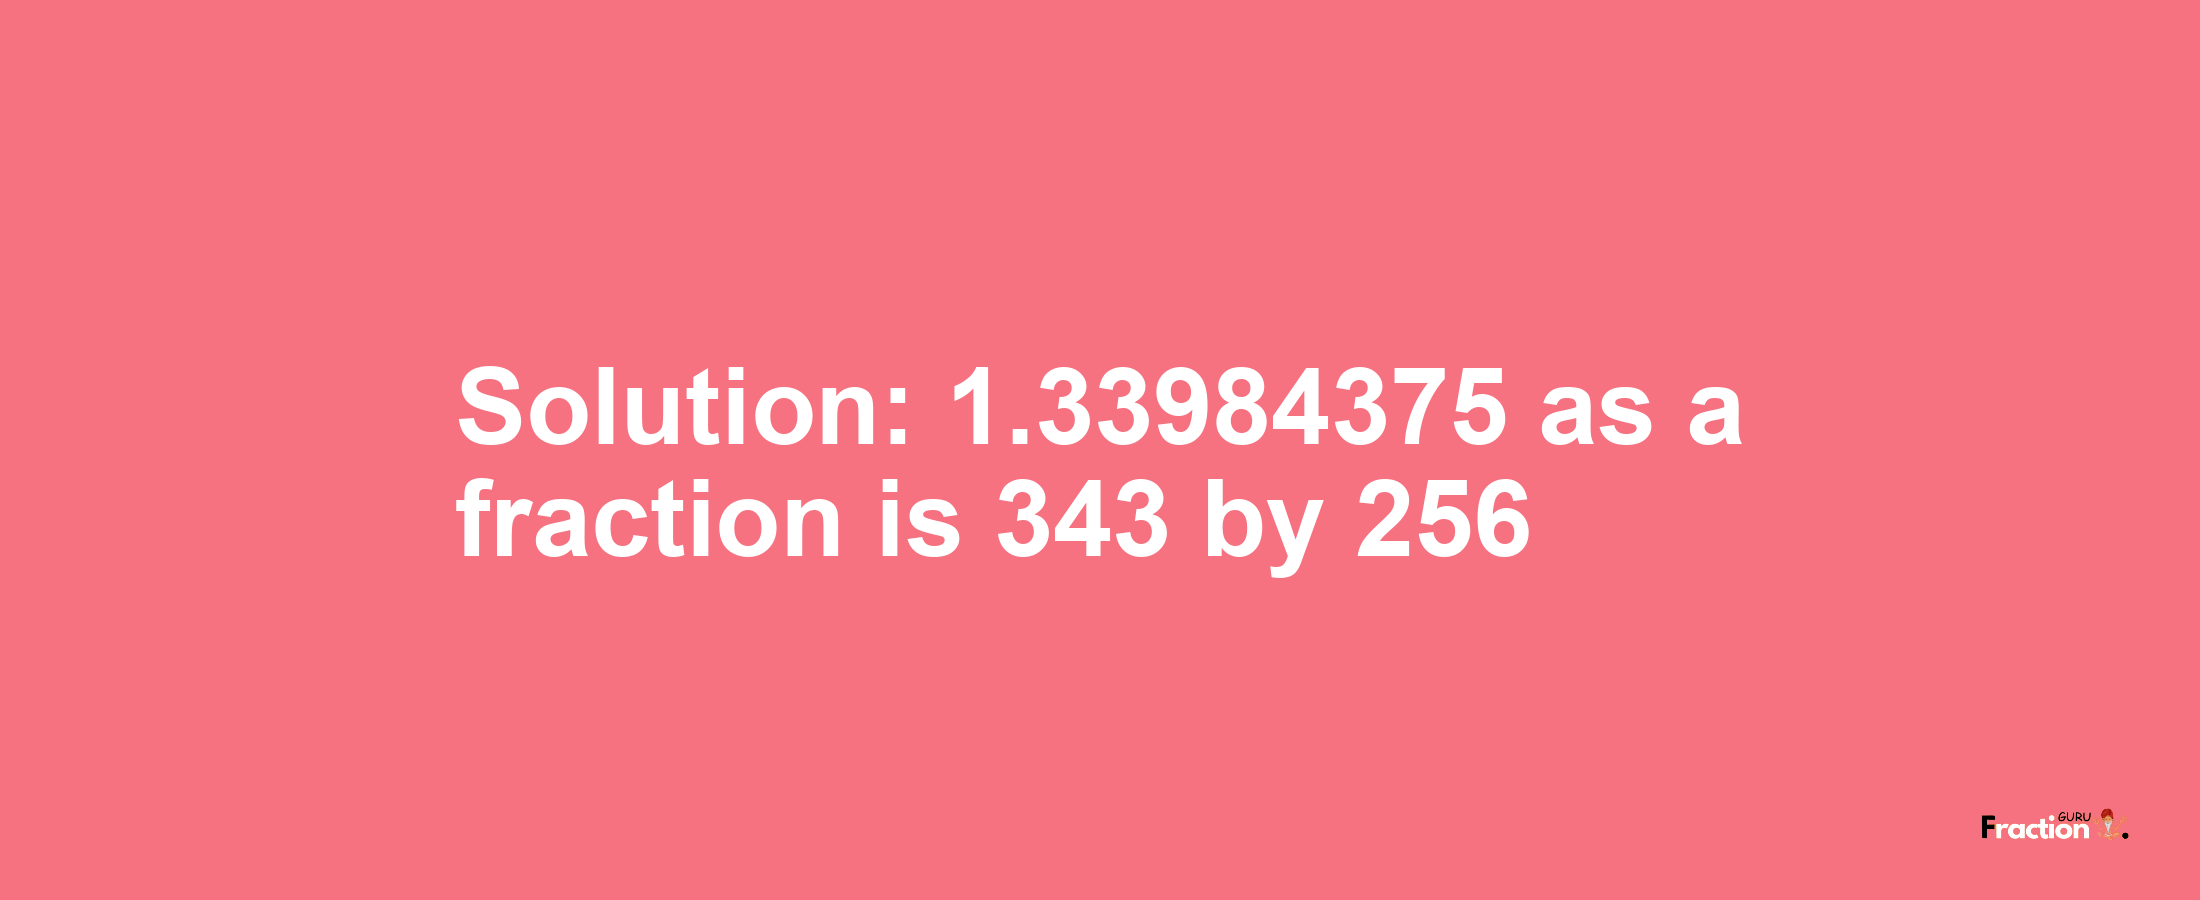 Solution:1.33984375 as a fraction is 343/256